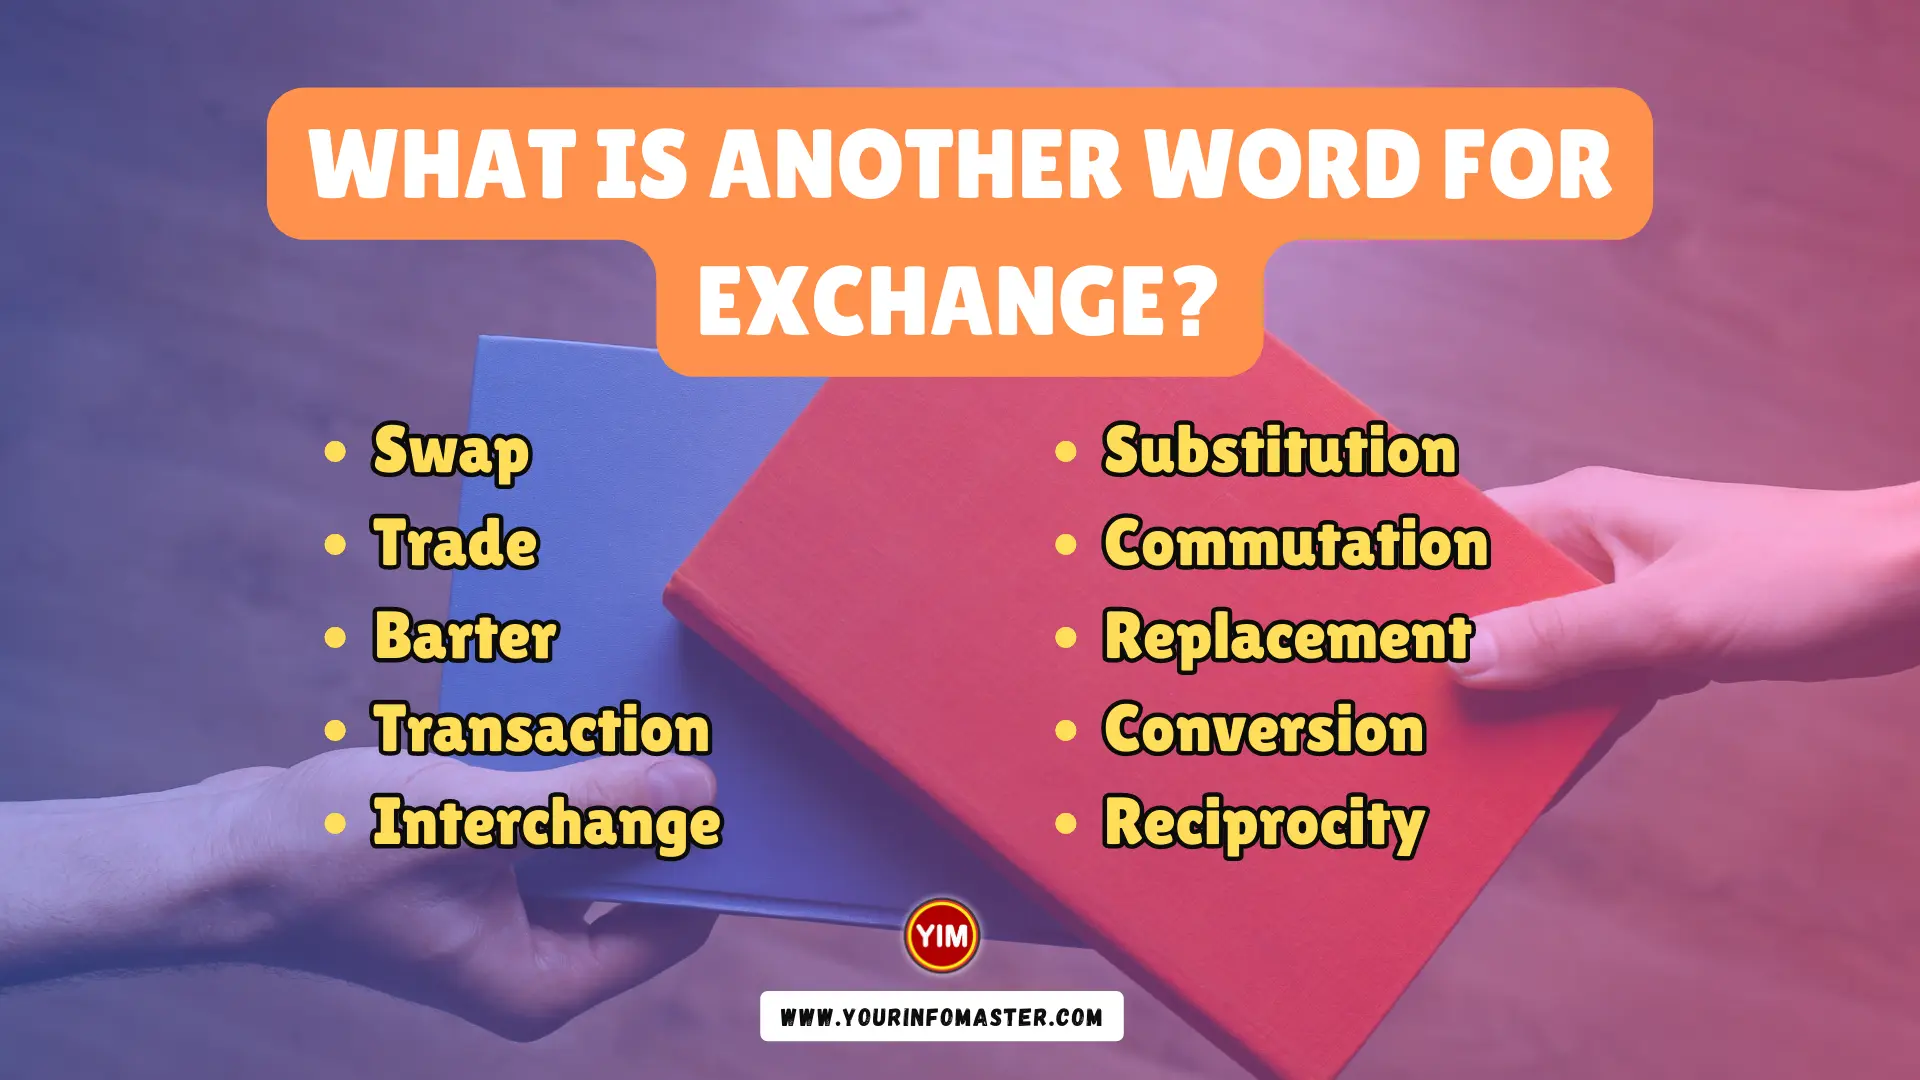 What is another word for Exchange